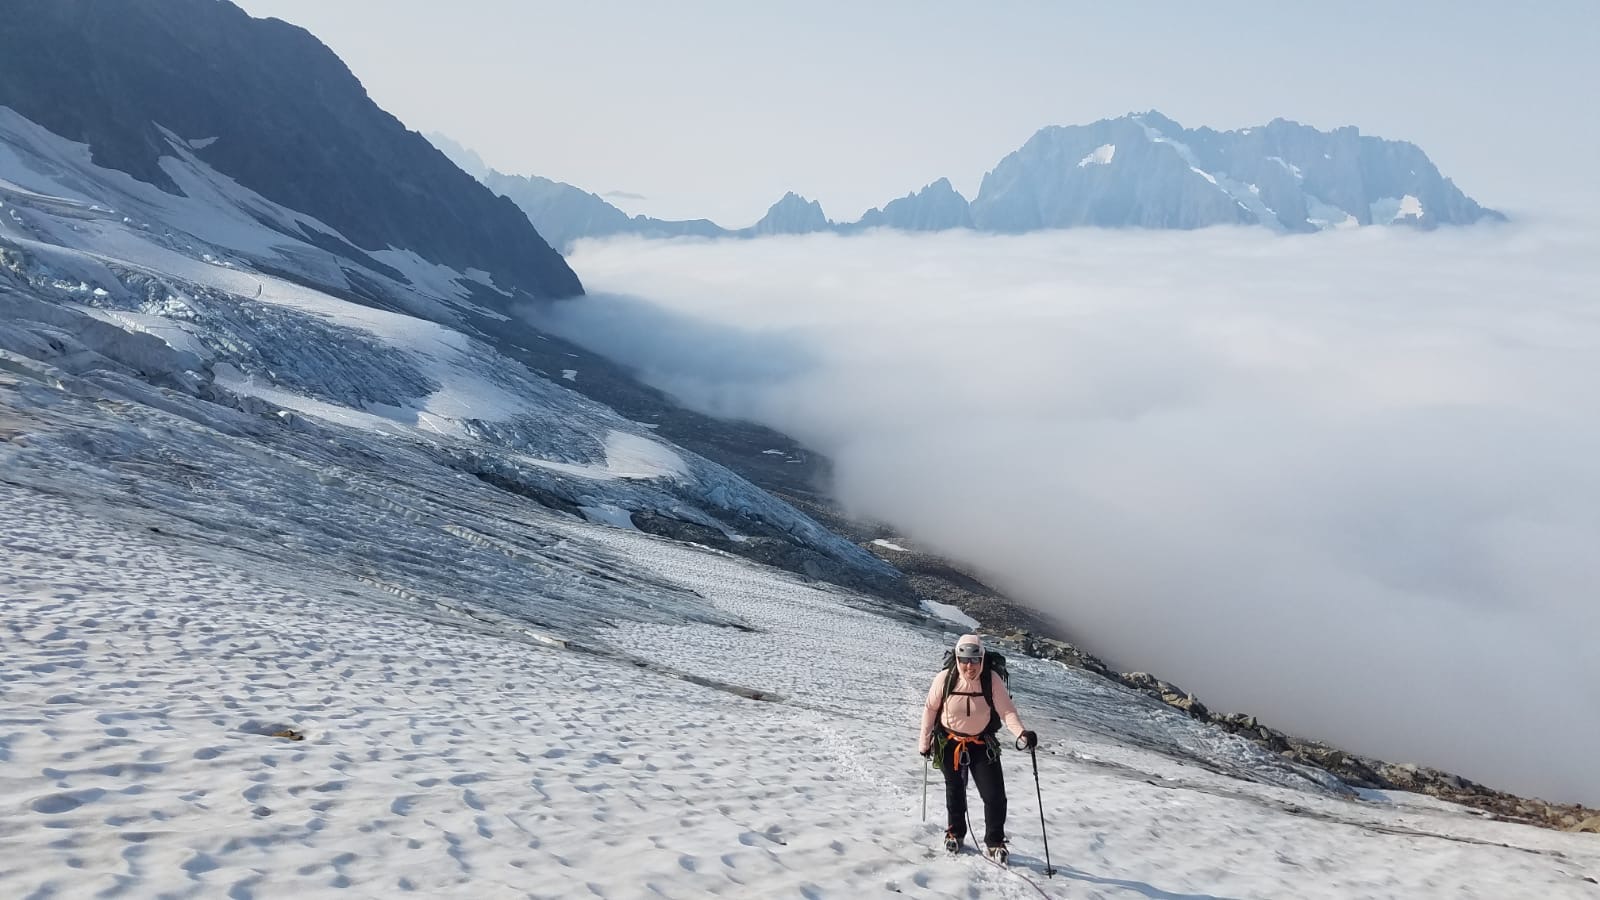 Jennie Draper, M'07, climbs above the clouds in Washington state. Contributed photo.